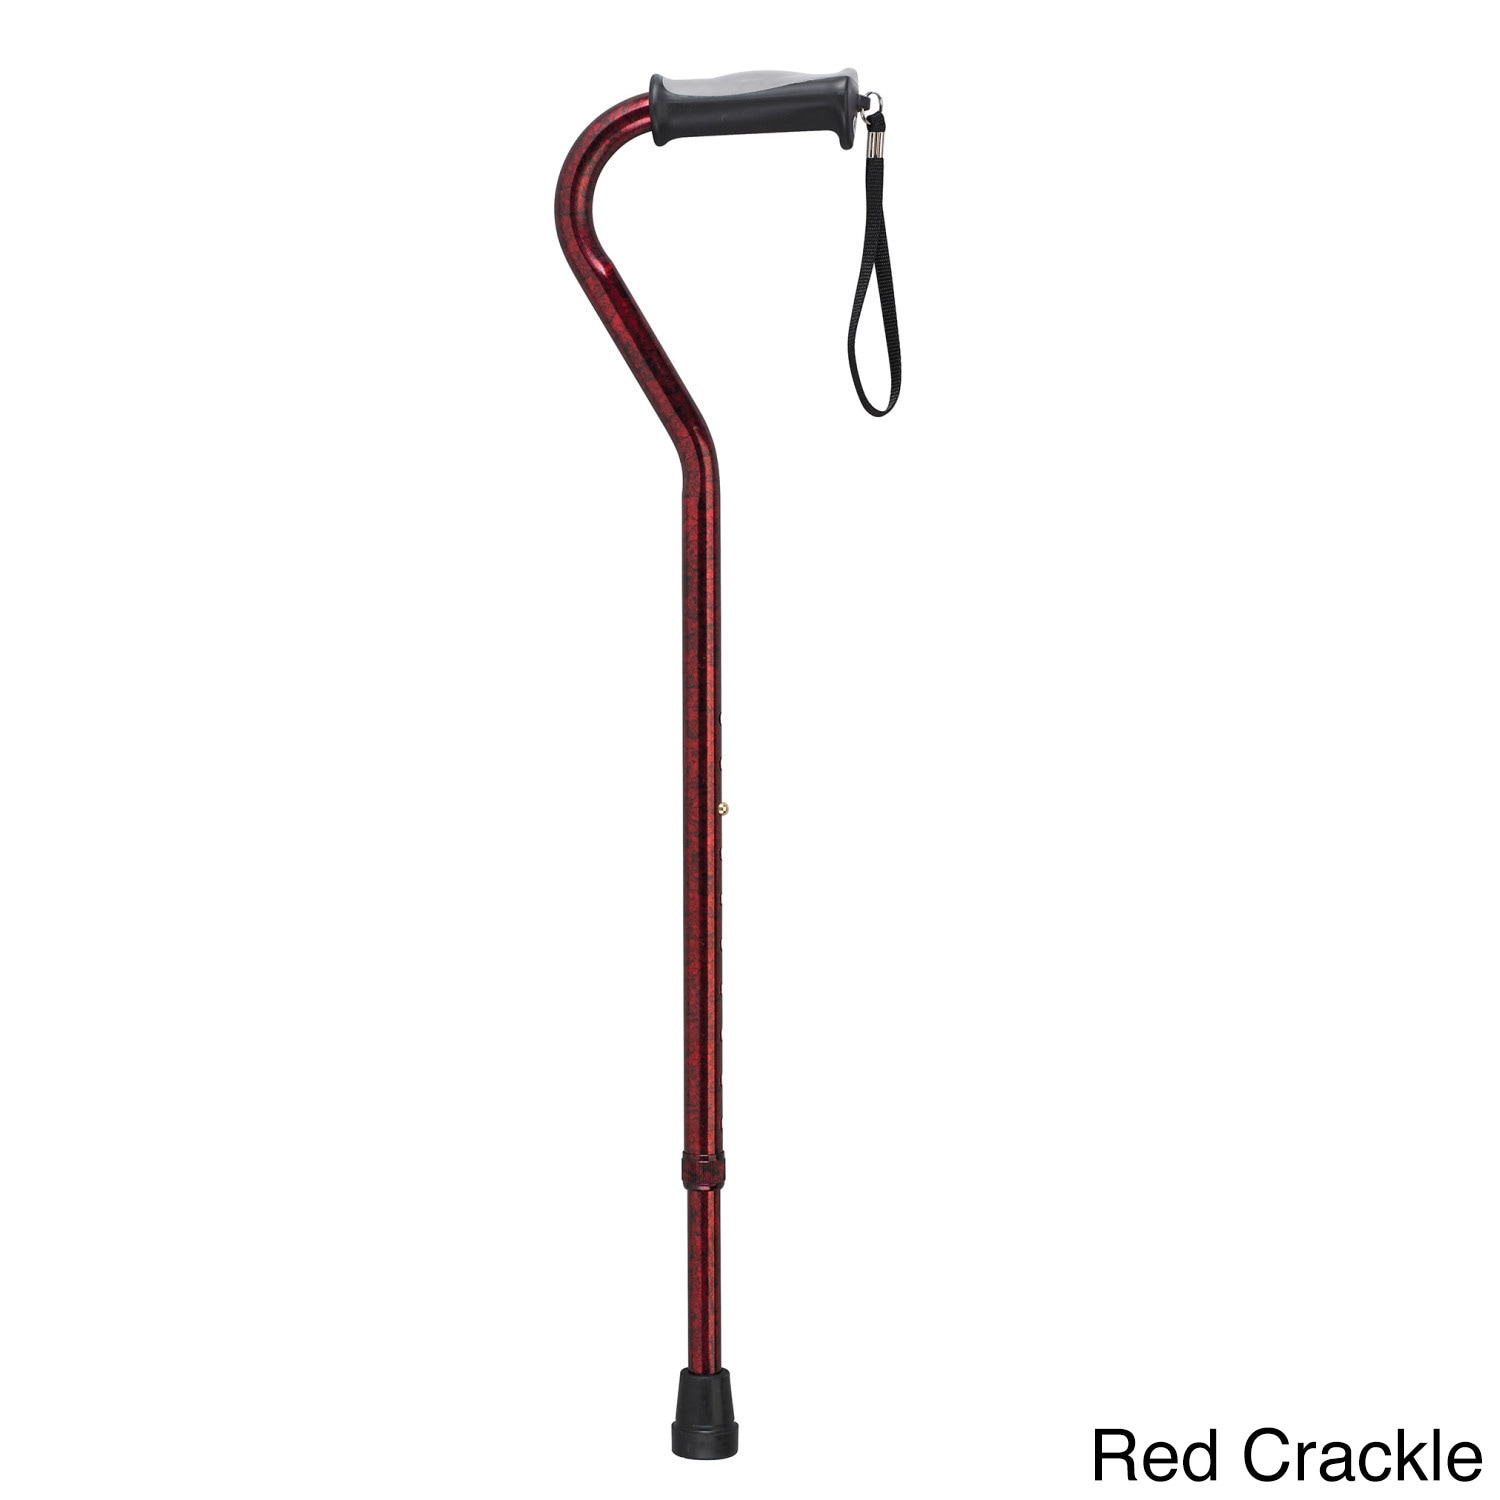 Adjustable Height Offset Handle Cane With Gel Hand Grip